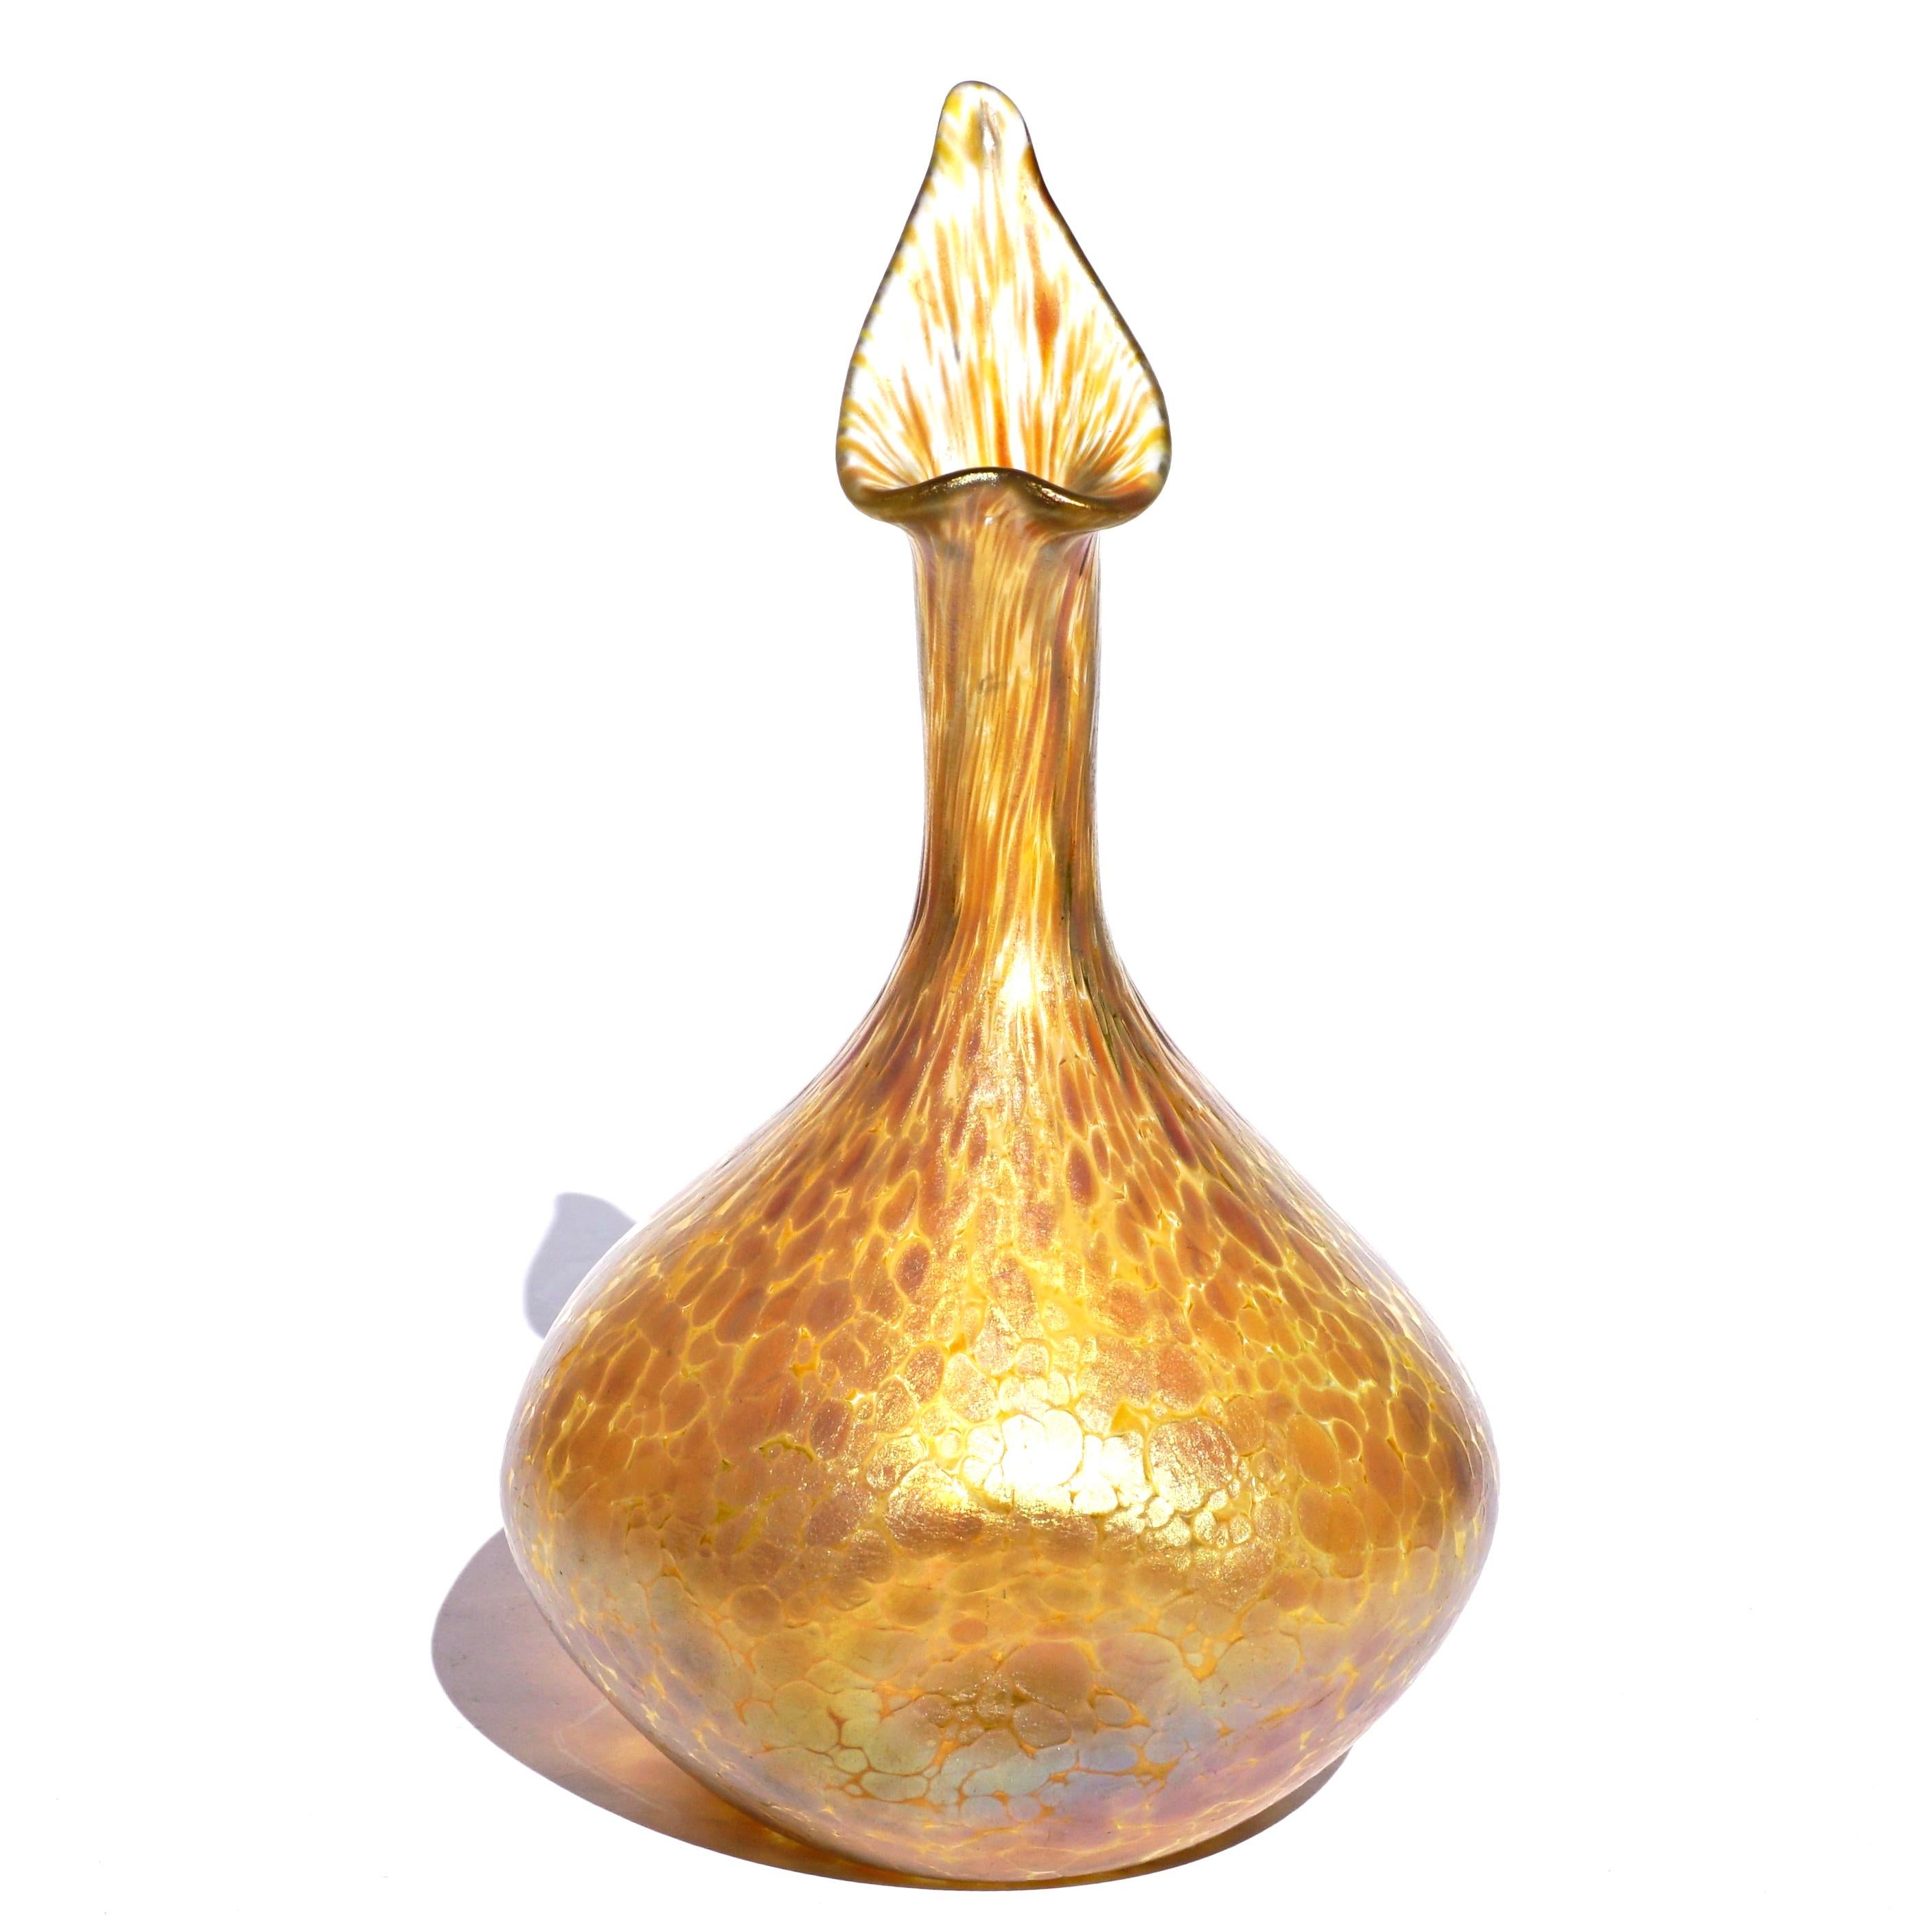 Loetz Iridescent and oil spot Flared Neck Art glass Floriform Goose neck vase.
Candia Papillon vase
Austria
Iridescent glass
Unsigned
Circa 1898 Art Nouveau

Measures: Height: 9.5 inches x 5.25 inches diameter

Condition: Excellent original